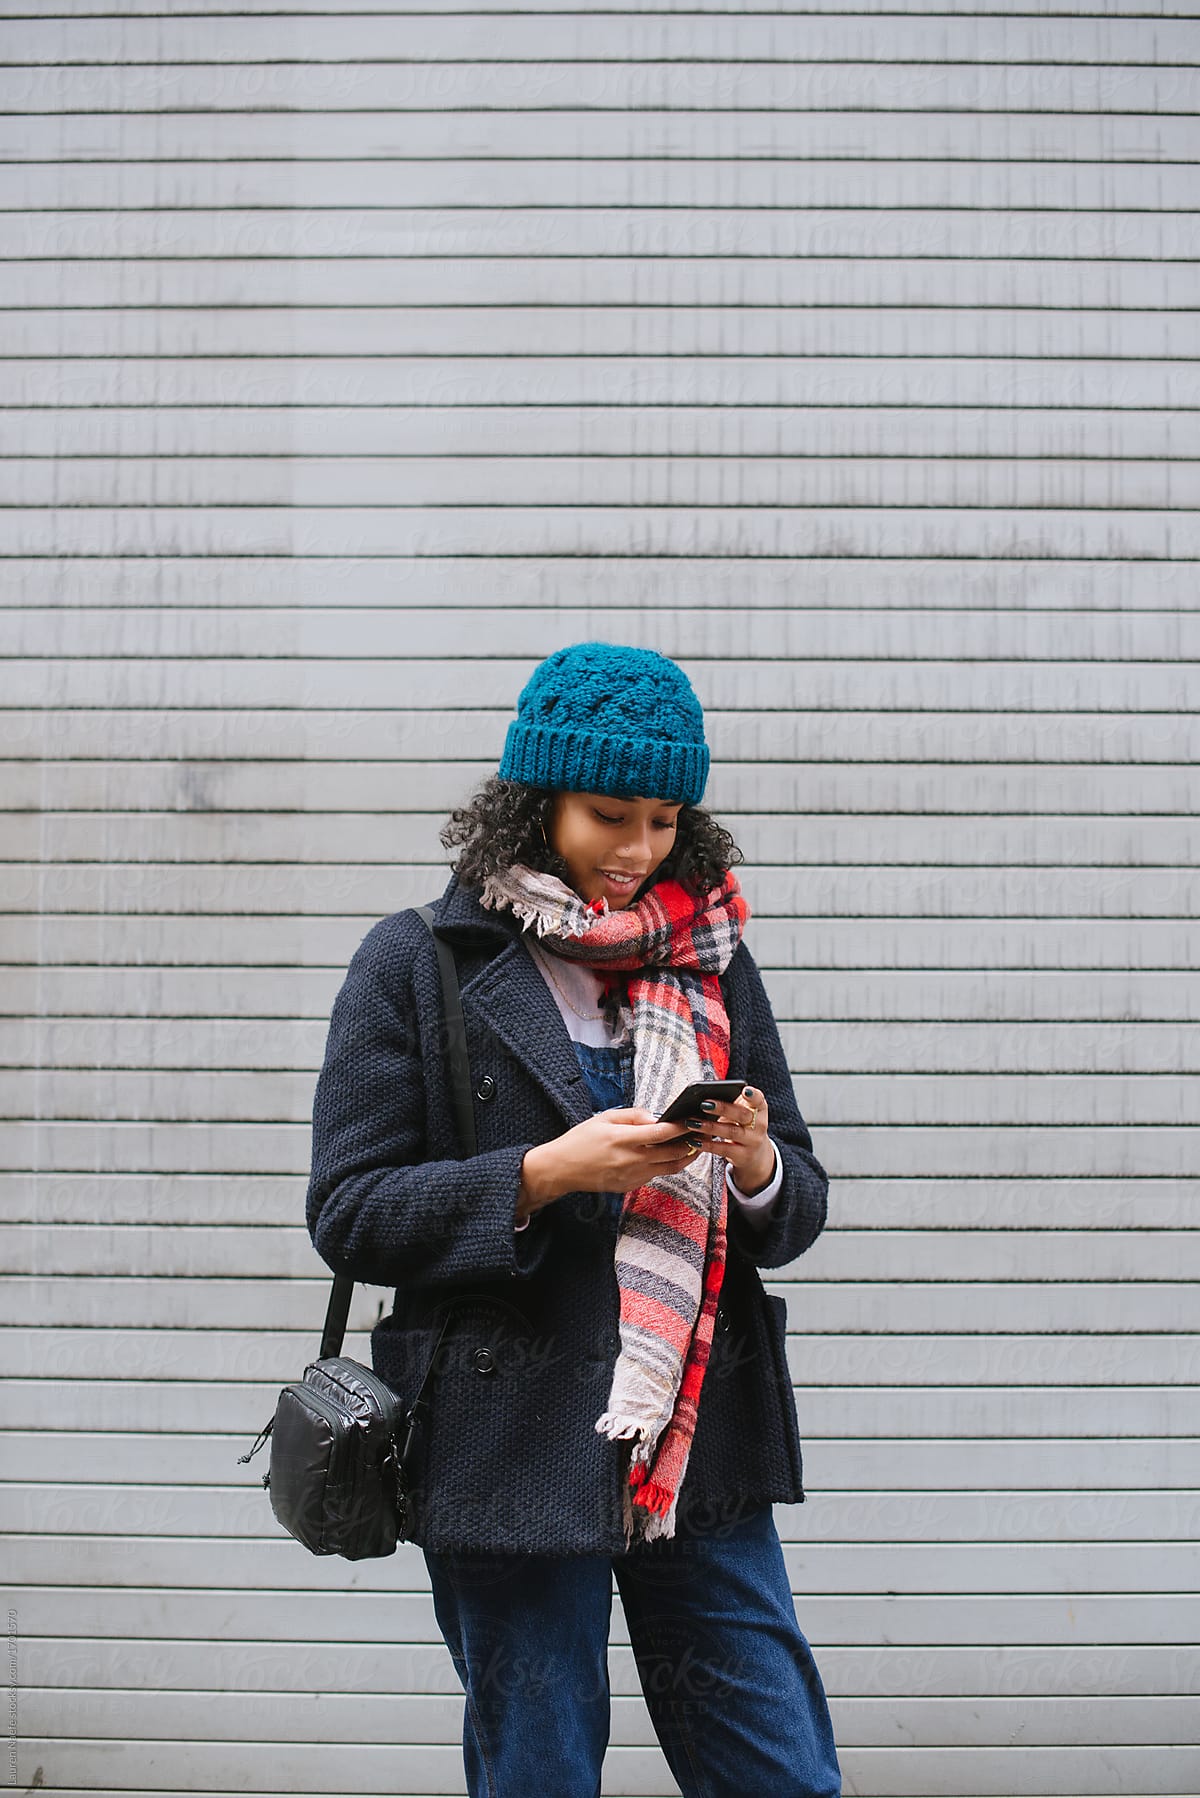 Young woman on phone in city on cold day